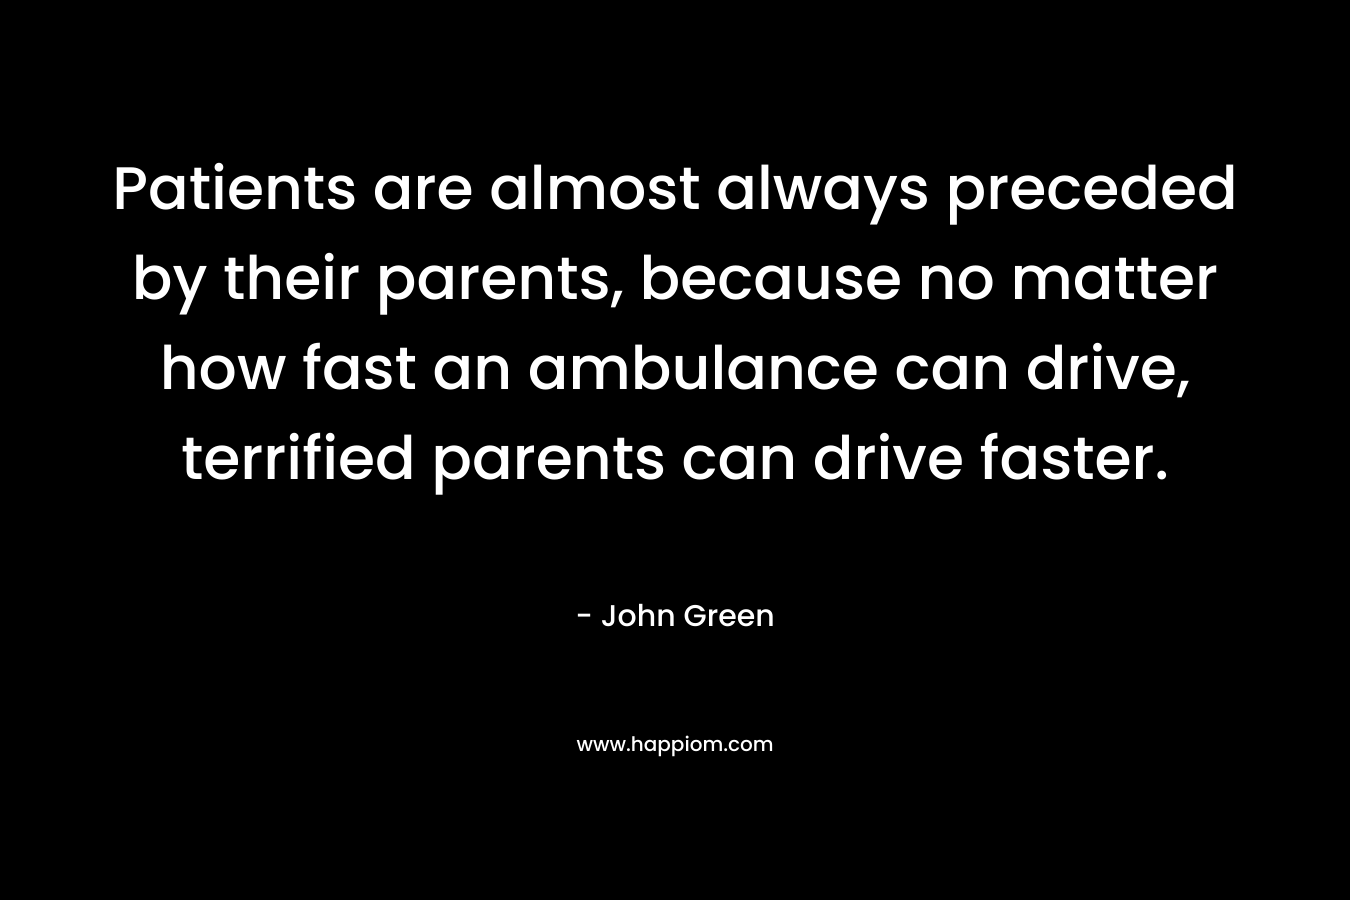 Patients are almost always preceded by their parents, because no matter how fast an ambulance can drive, terrified parents can drive faster. – John Green